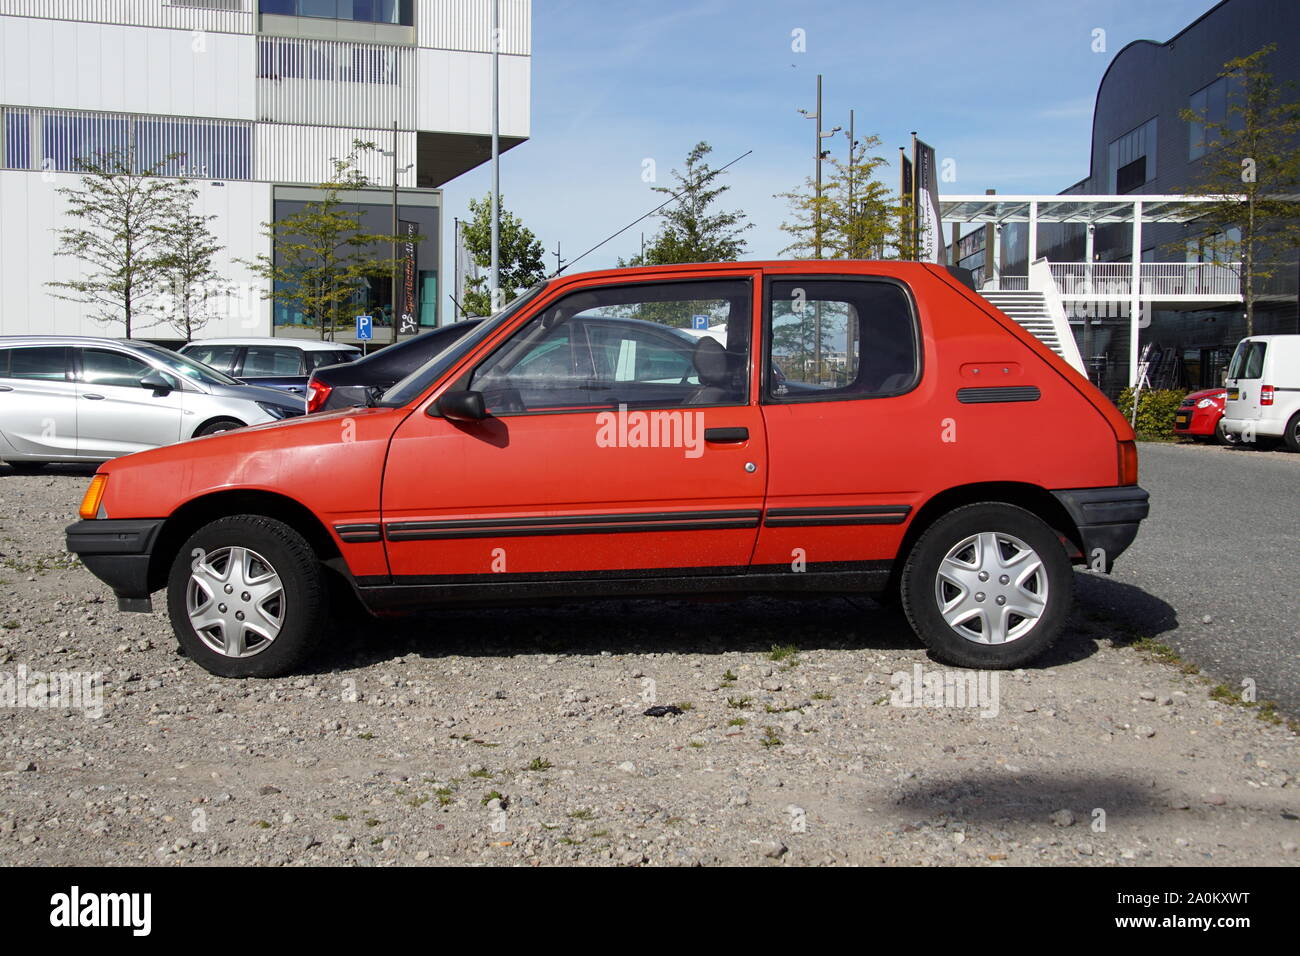 Almere, the Netherland - September 20, 2019: Used red Peugeot 205 parked on a public parking lot. Nobody in the vehicle. Stock Photo